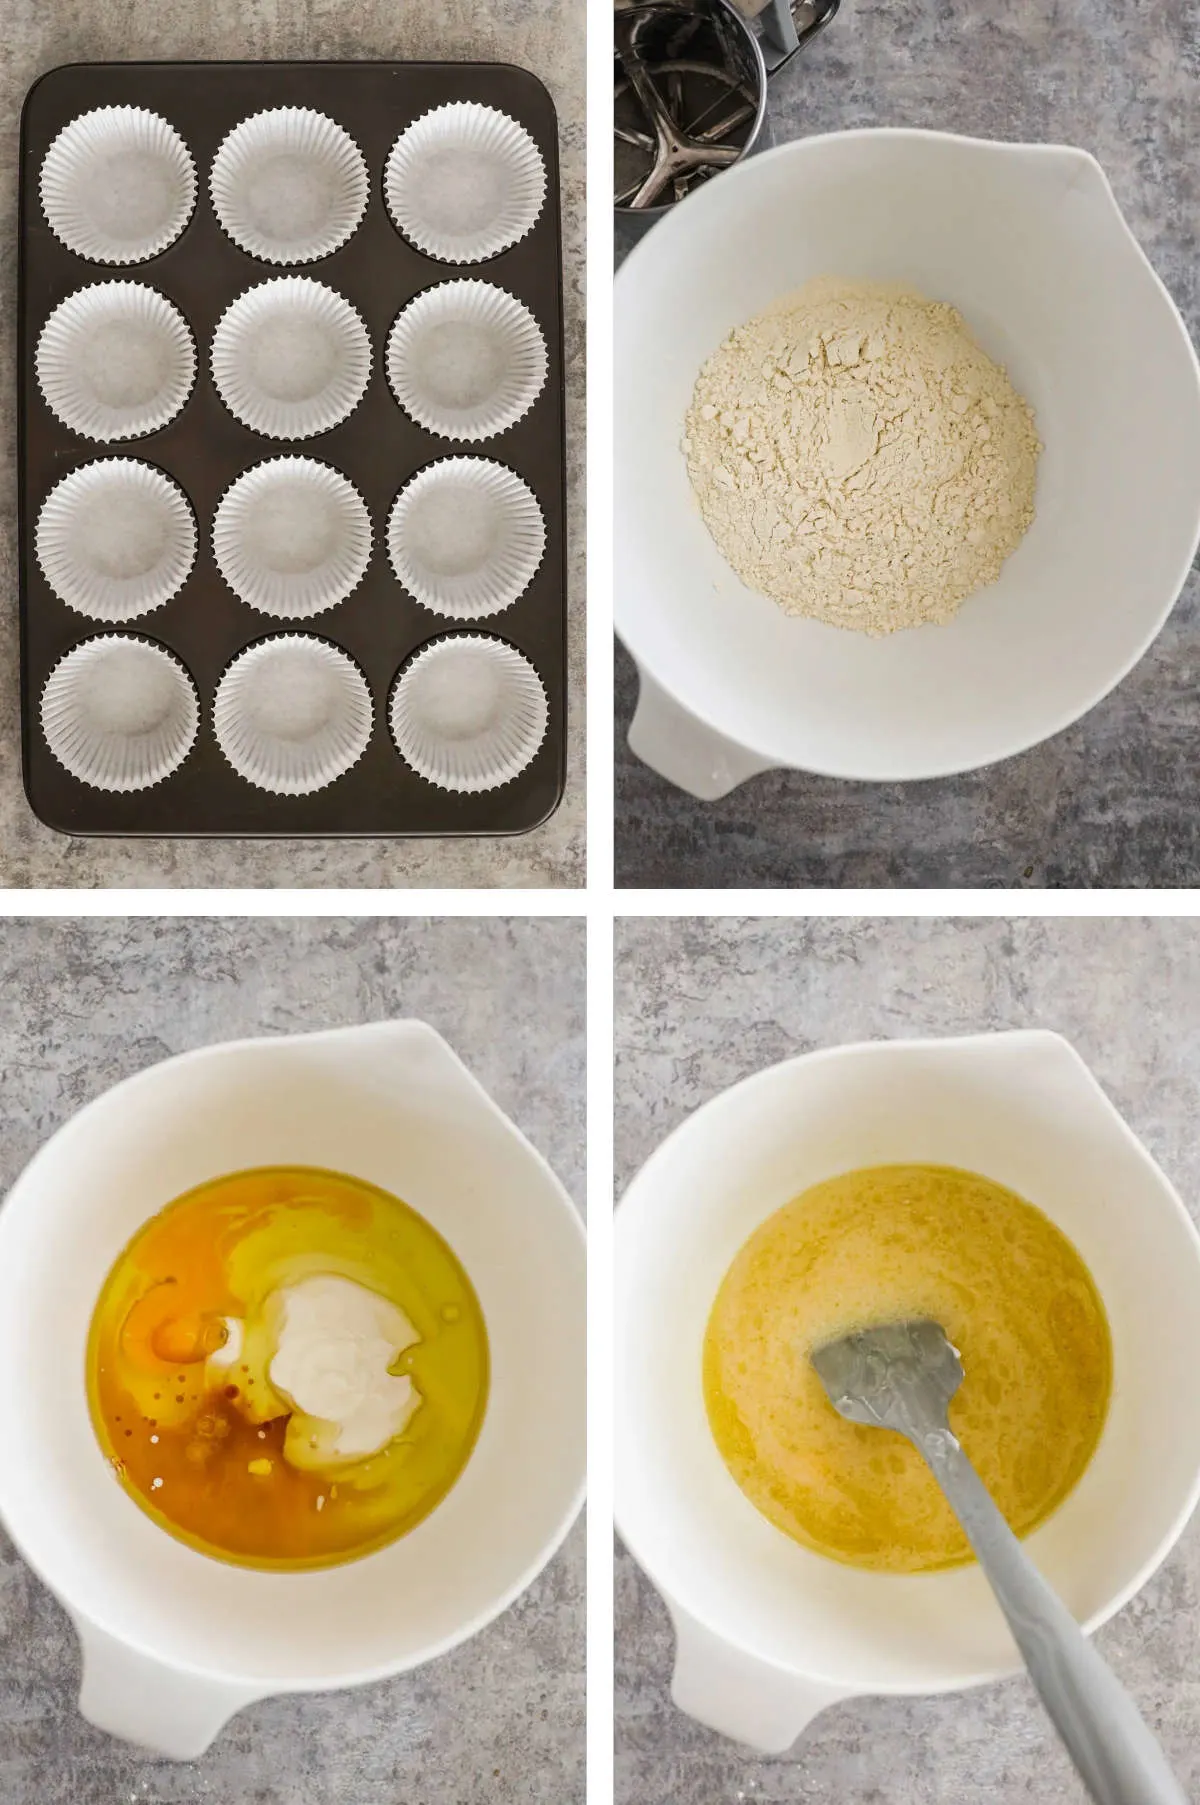 Four images in one: 1. Cupcake liners in muffin tin. 2. Dry ingredients in white bowl. 3. Wet ingredients in bowl. 4. Wet ingredients mixed. 